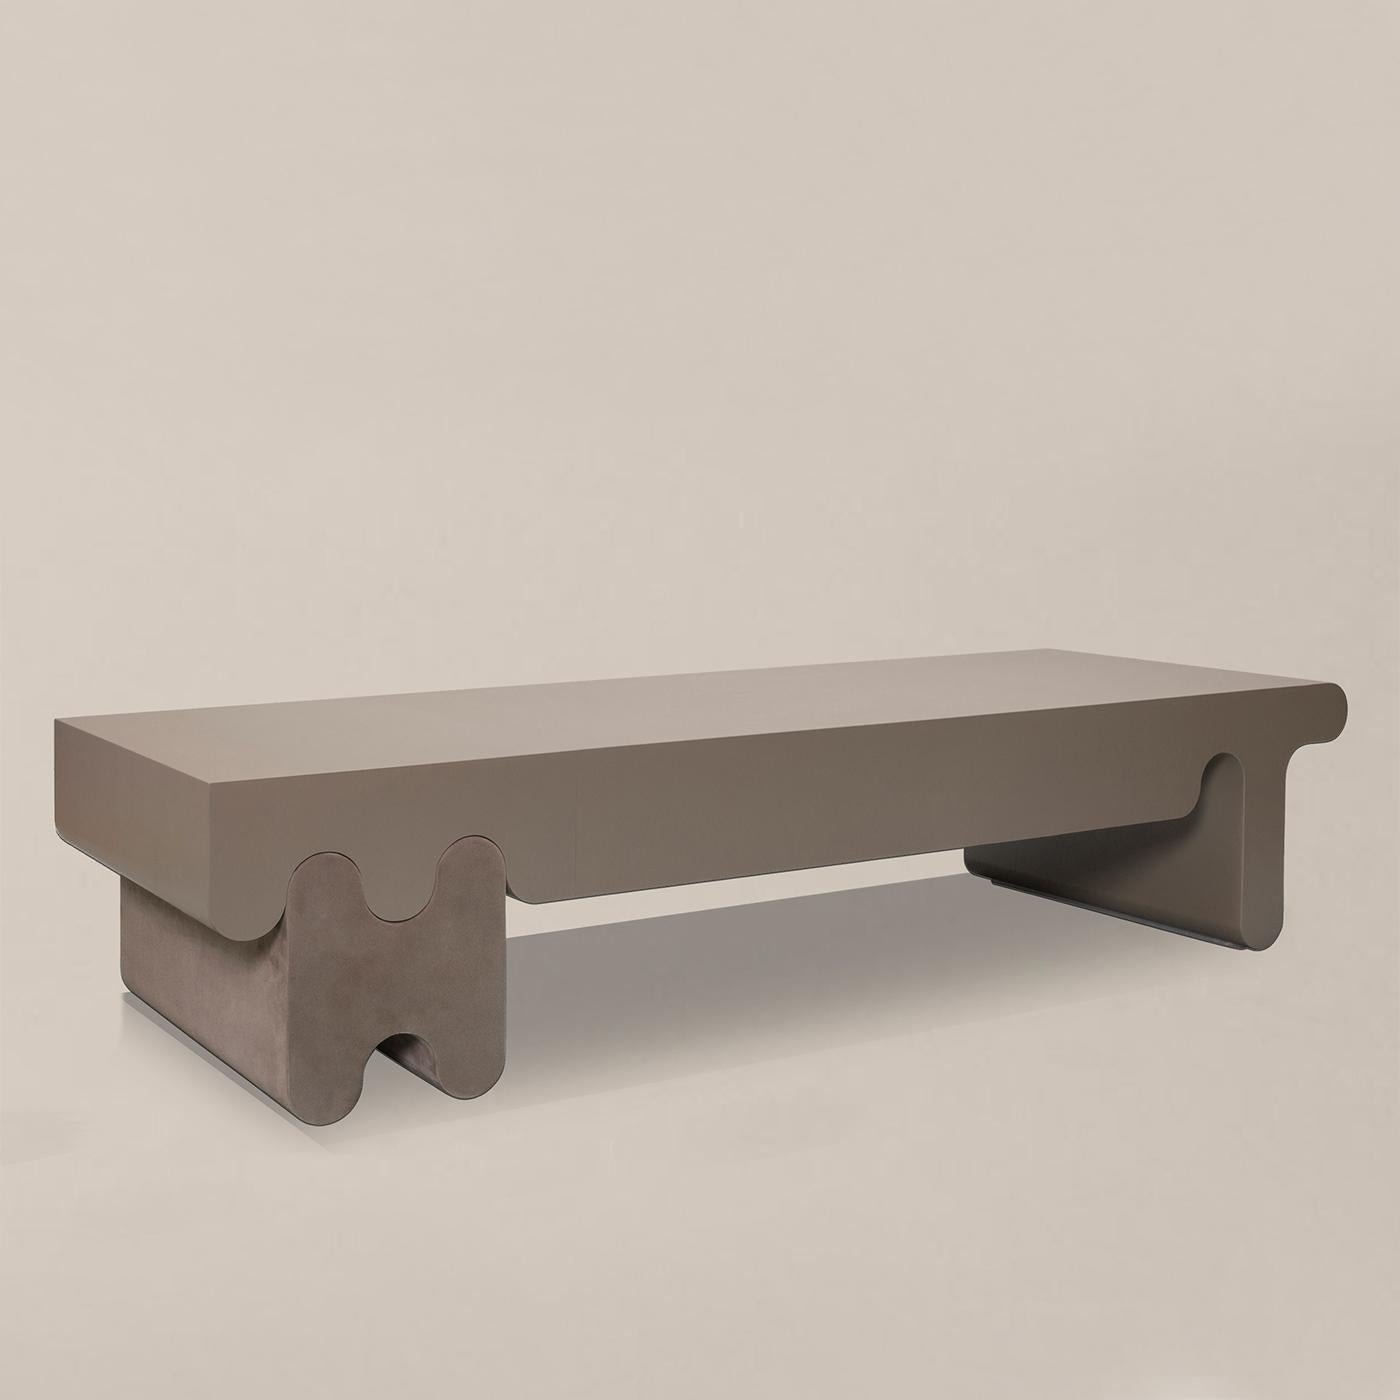 Coffee table liguria leather with solid wood structure, 
with covered top in genuine leather in smoke color finish,
and with base covered in italian suede leather in smoke 
color finish.
Also available in other suede colors on request.